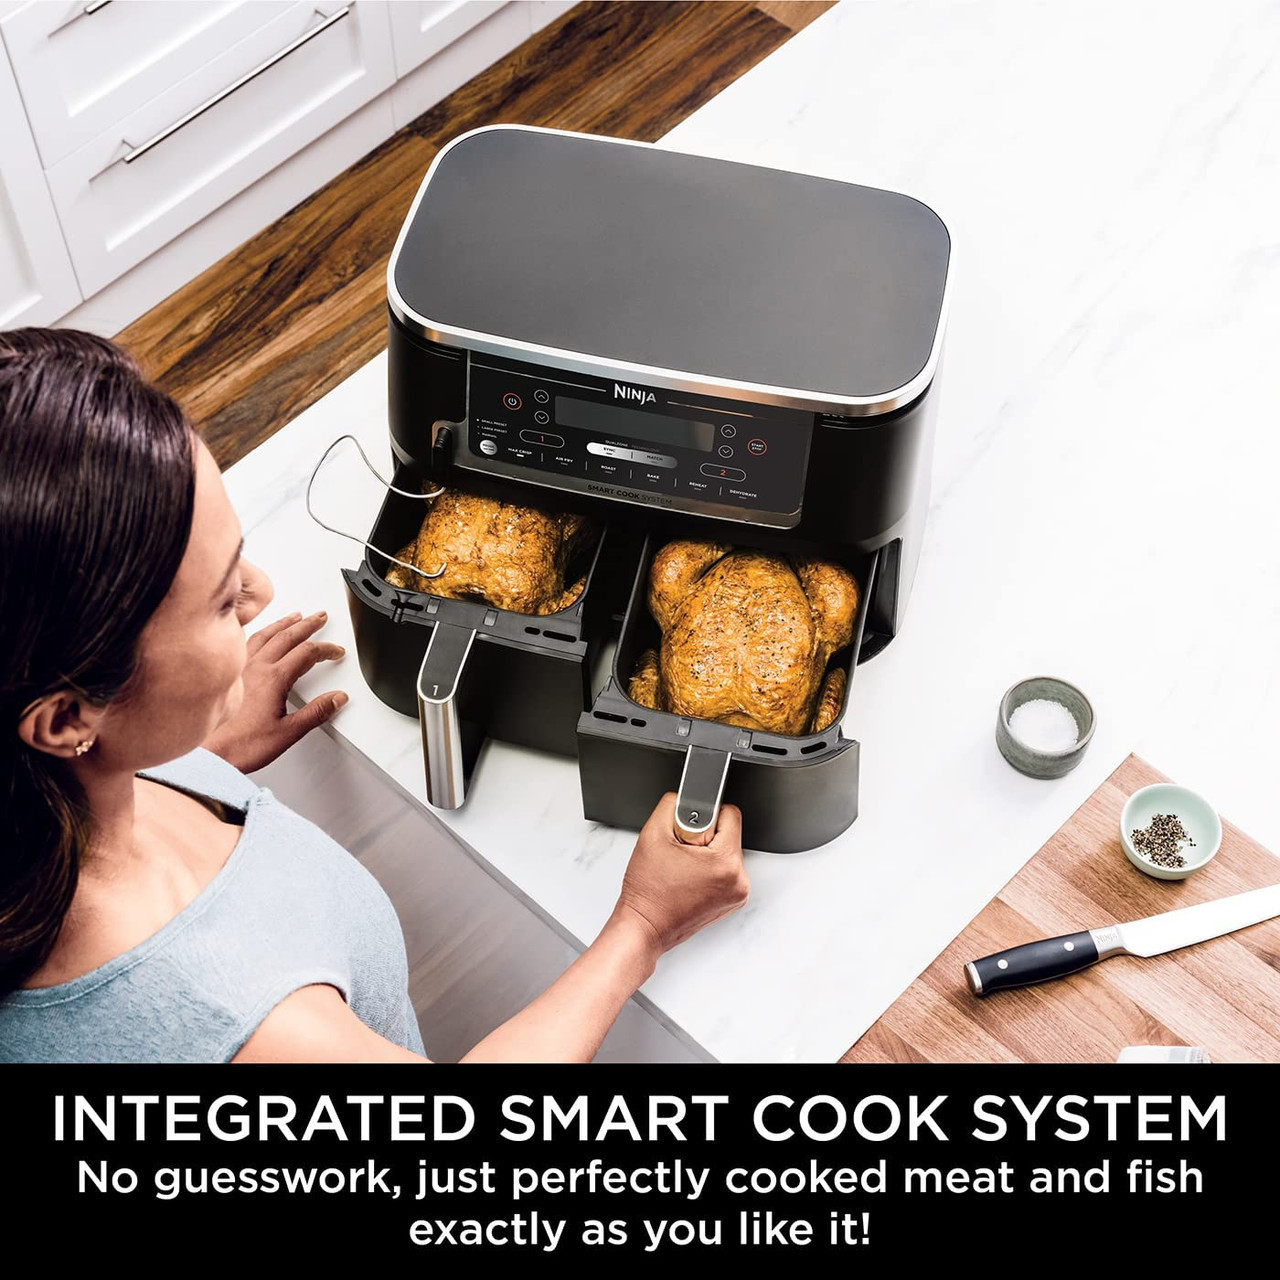 https://cdn11.bigcommerce.com/s-8ek7z3h3jn/images/stencil/1280x1280/products/8716/47561/ninja-foodi-max-dual-zone-air-fryer-with-smart-cook-system-or-af451uk__77942.1681526668.jpg?c=1?imbypass=on